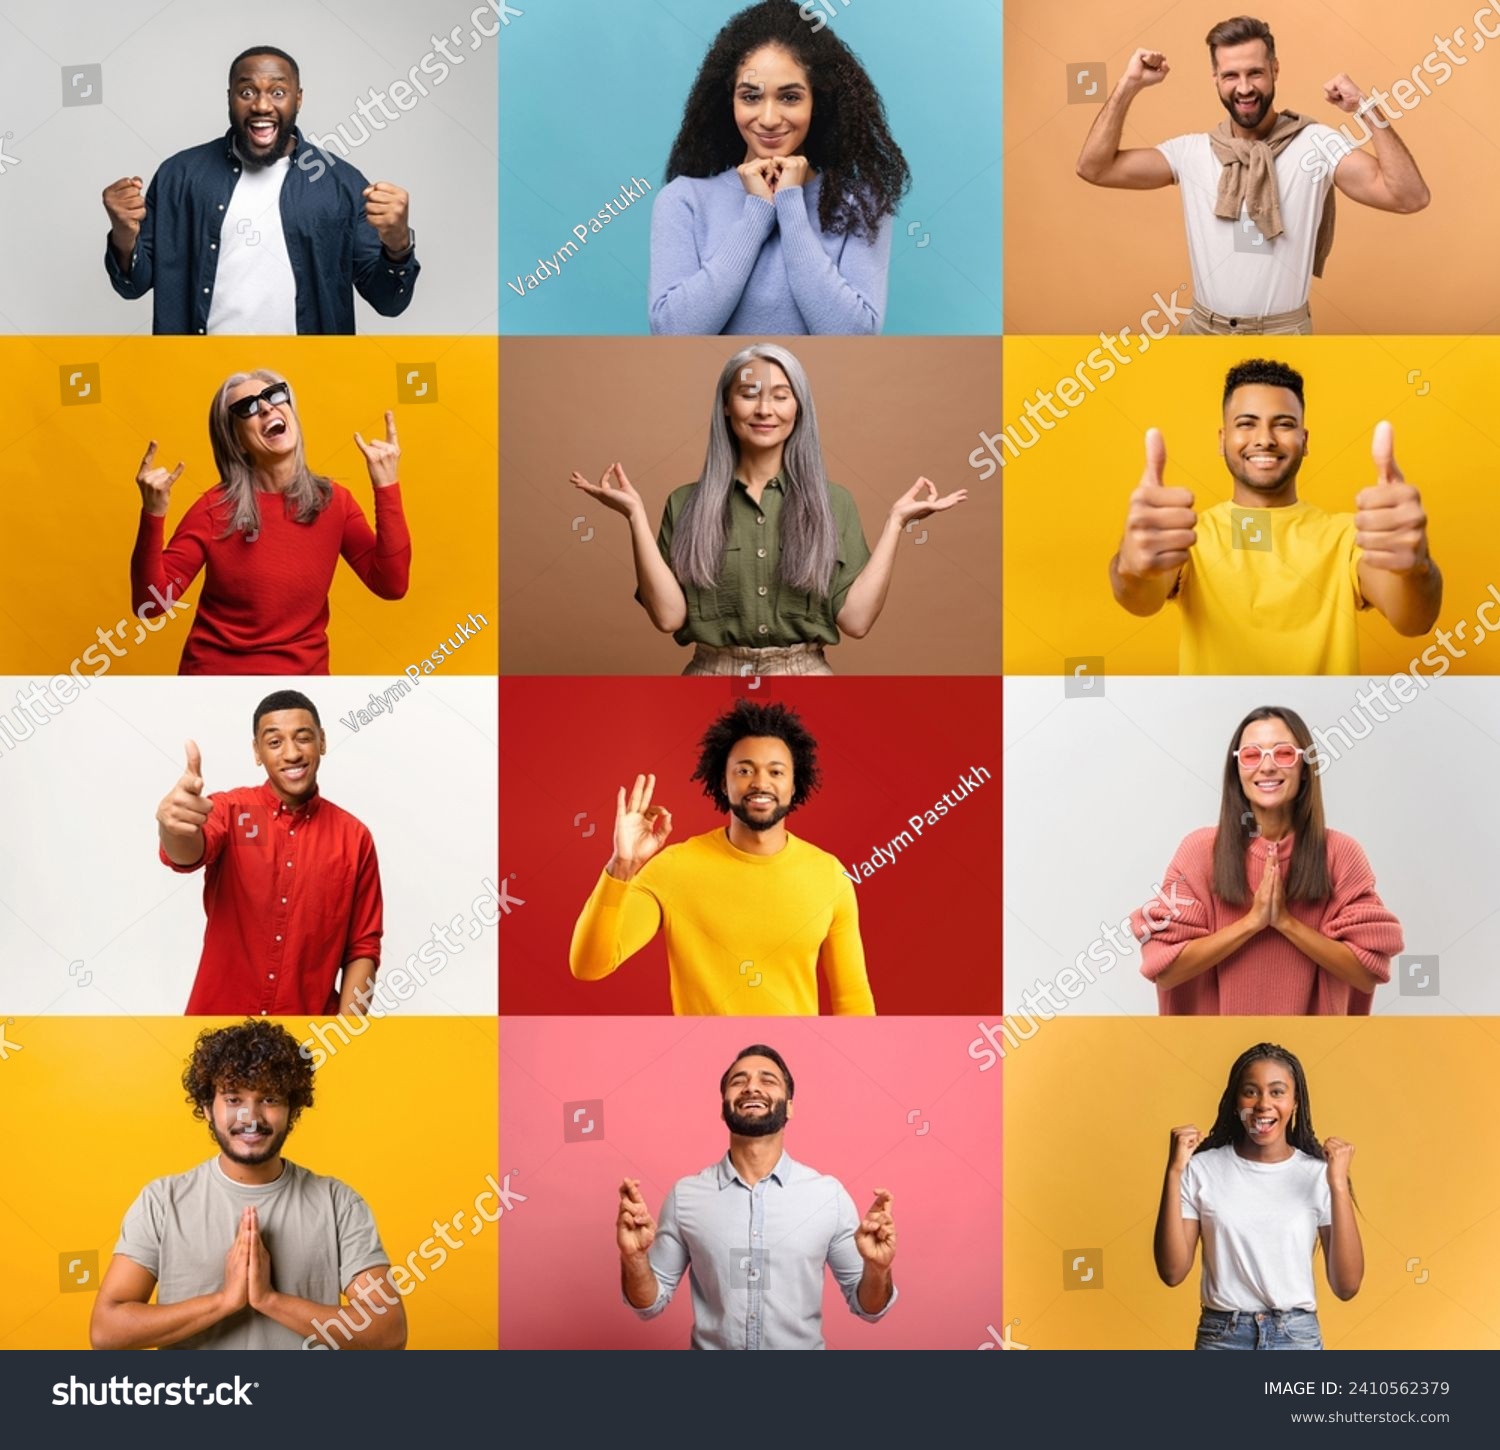 This collection portrays individuals in expressive, joyous poses, each against a colored backdrop, show success and happiness, with thumbs up, victory signs, and hands in meditation positions #2410562379